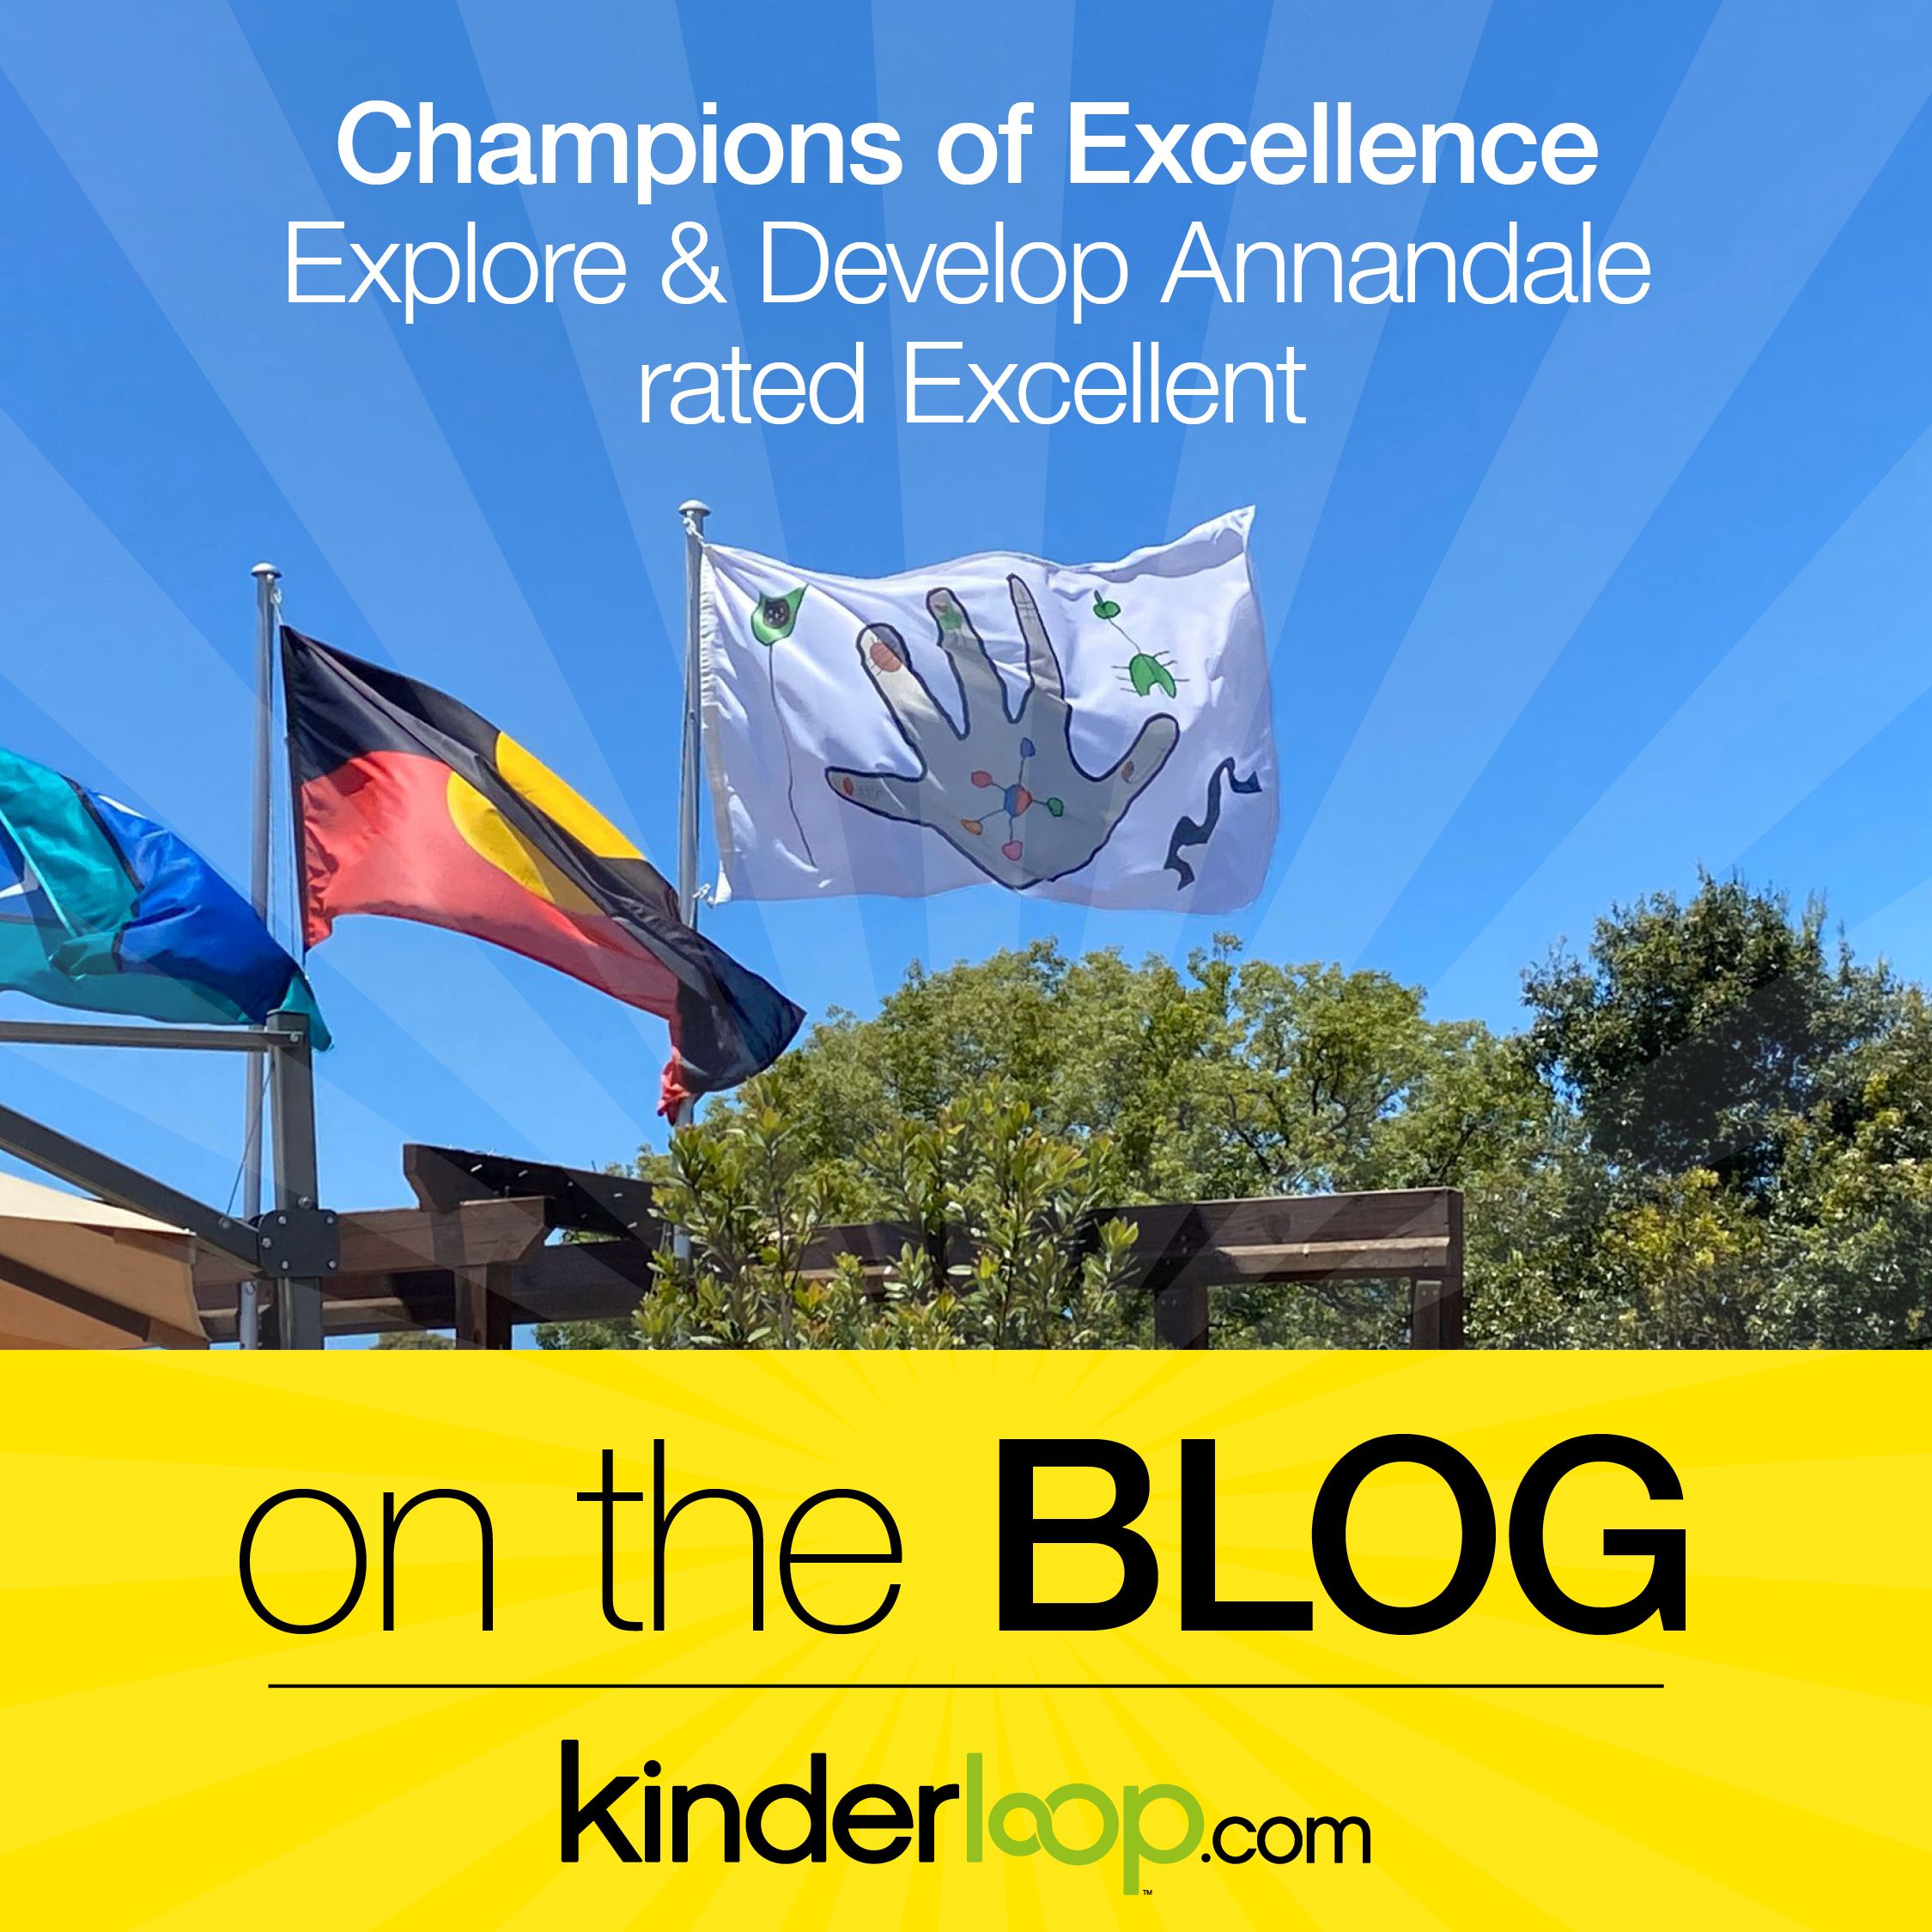 Champions of Excellence: Explore & Develop Annandale Rated Excellent